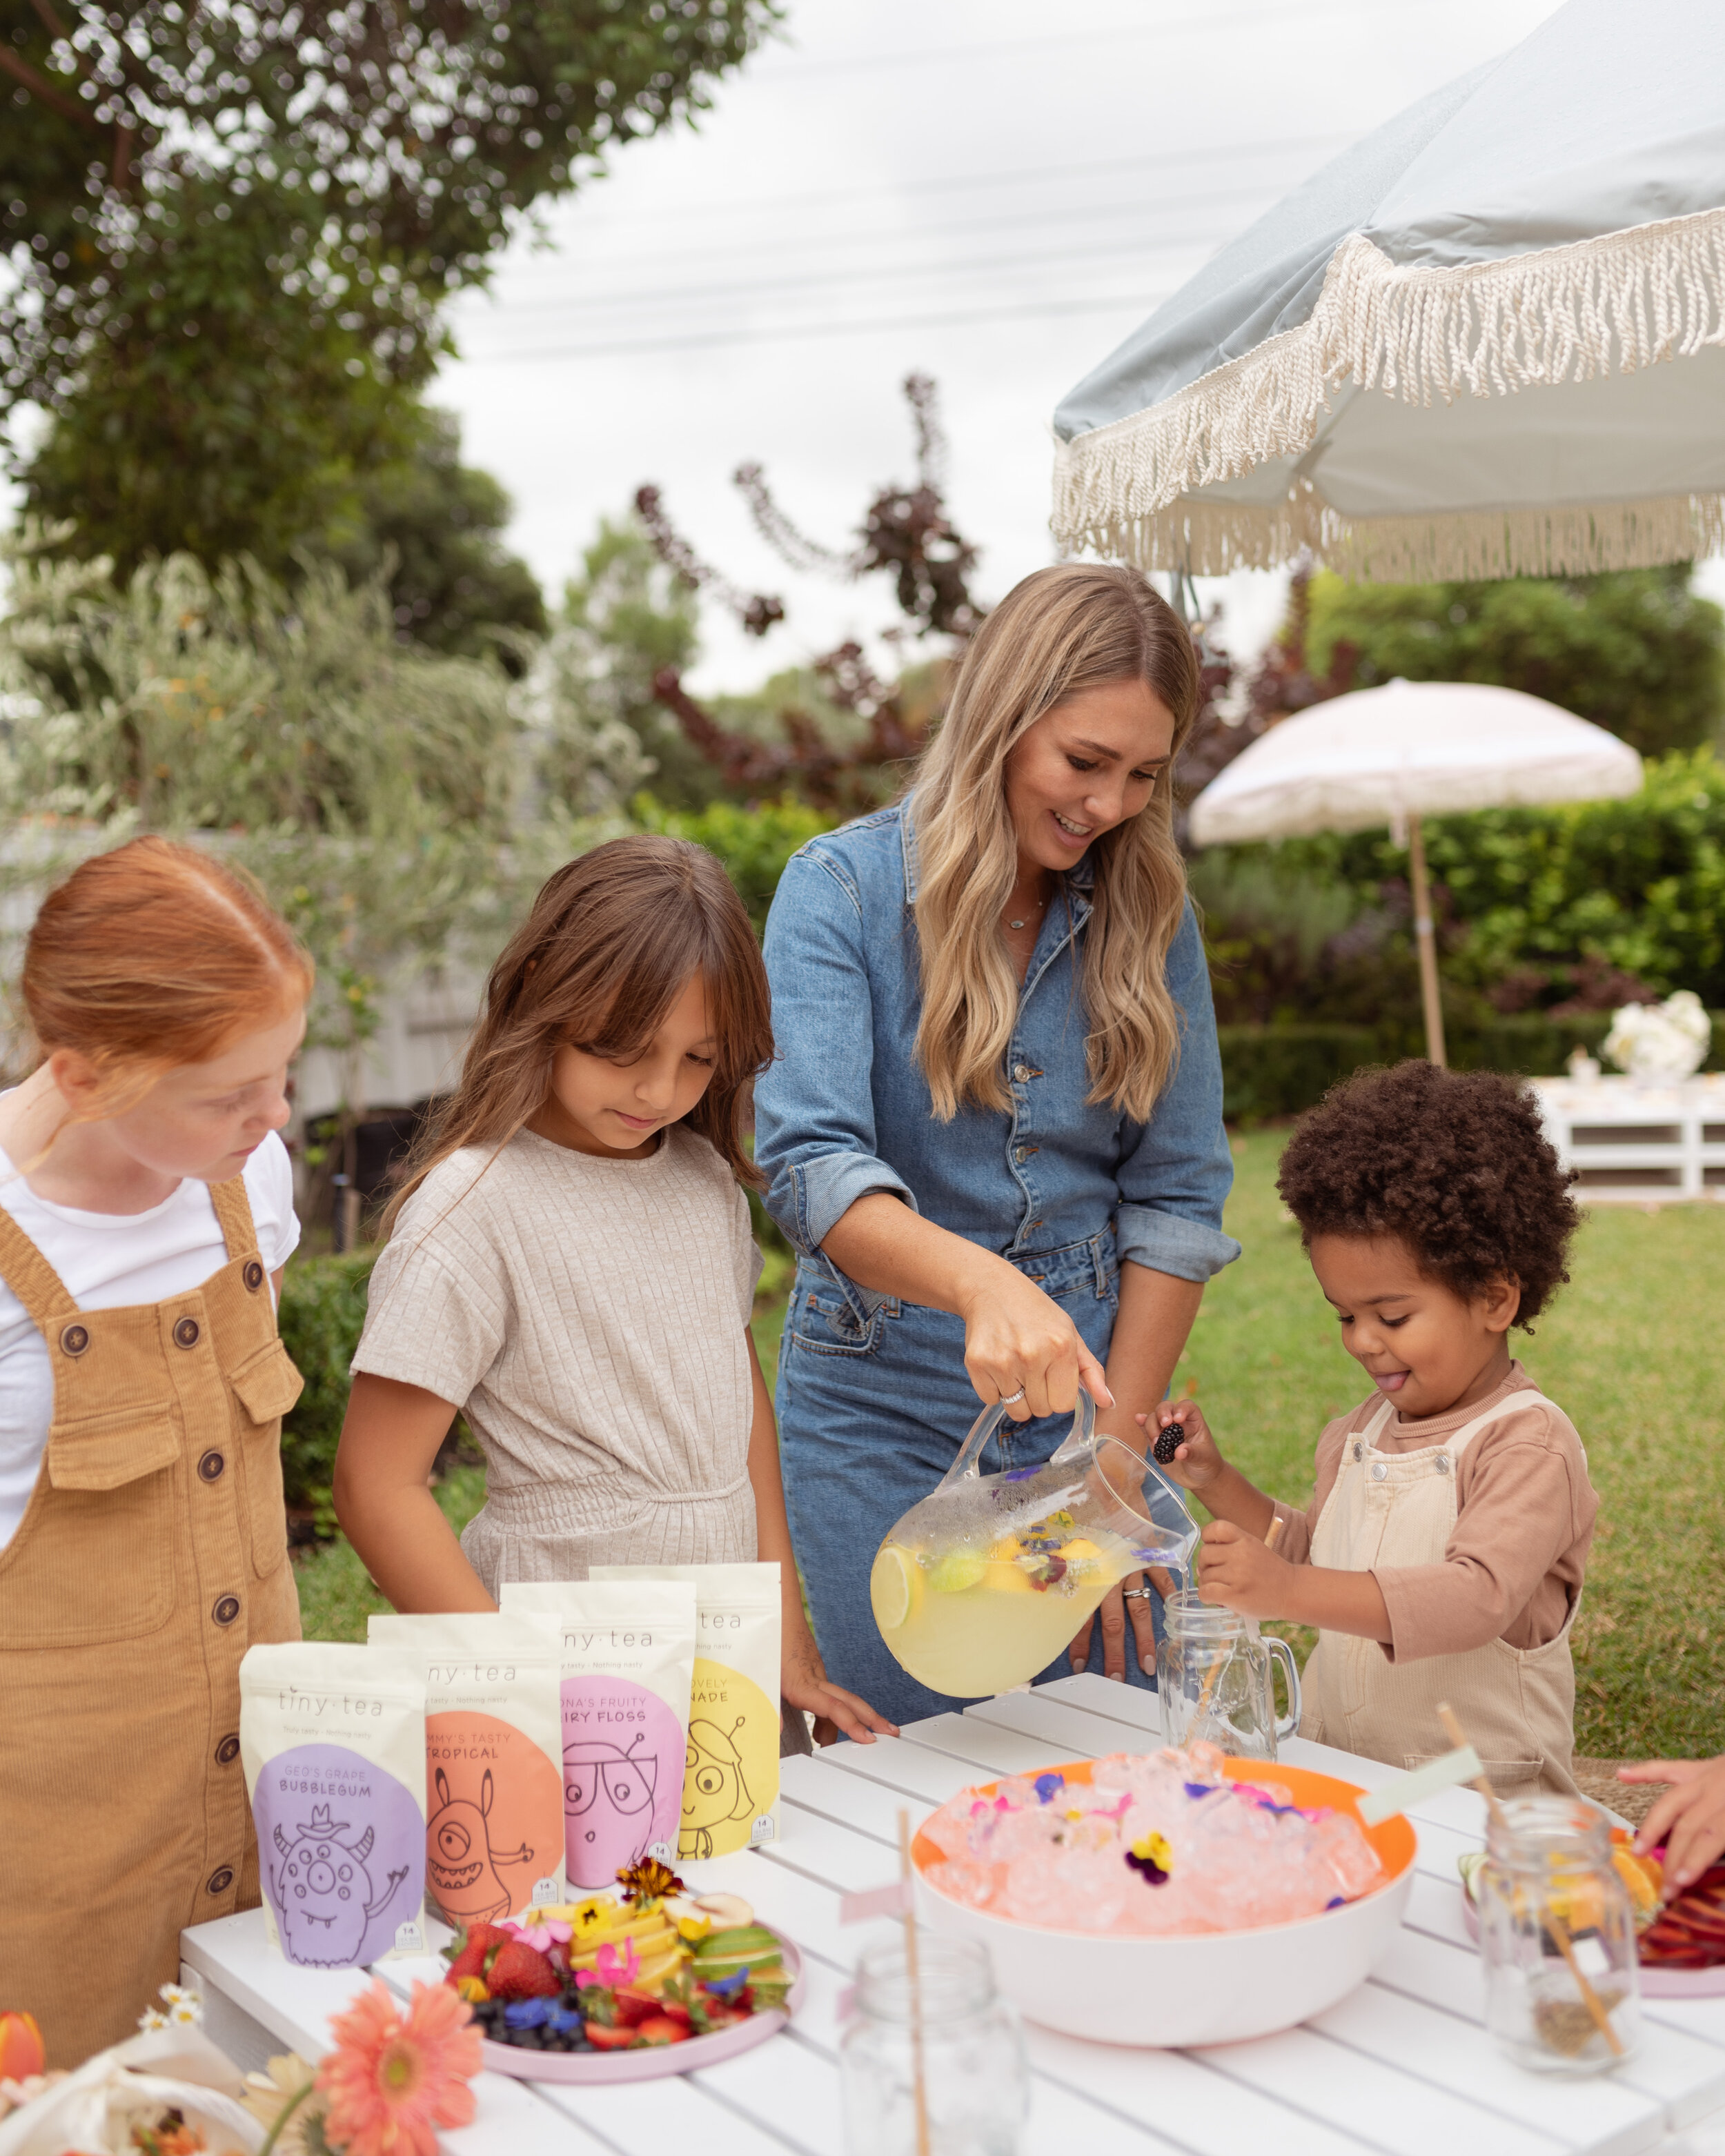 All the family can get involved and have lots of fun whilst creating your very own tea. Everyone can make their own personalised flavour, whilst keeping it fresh, healthy and interactive.